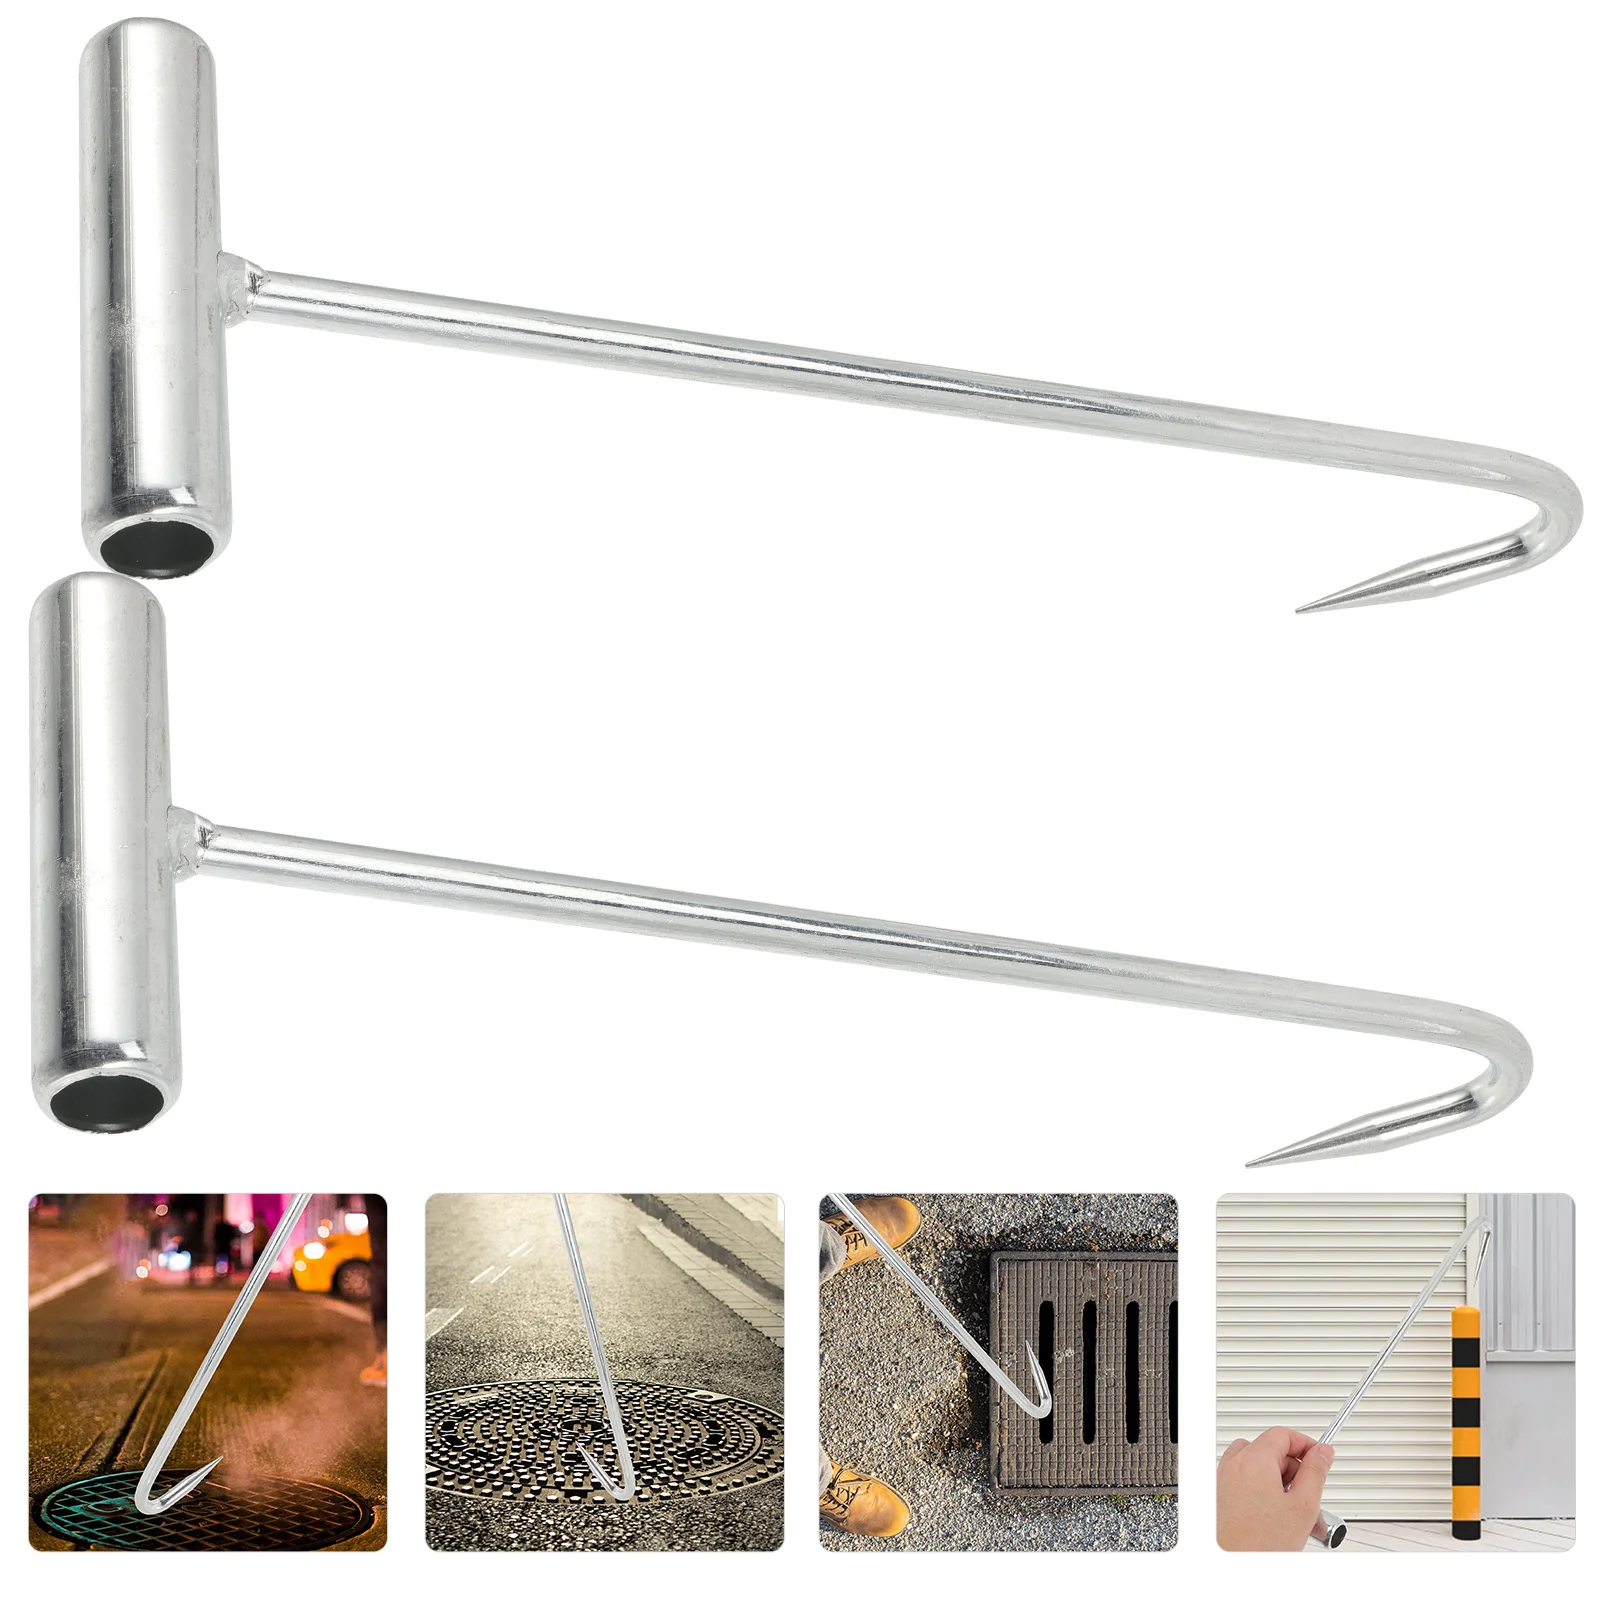 

2 Pcs Pull Hook Lifting Manhole Stainless Steel Hooks Lid Well Cover Heavy Duty Ceiling Iron For Holes Door Lifter